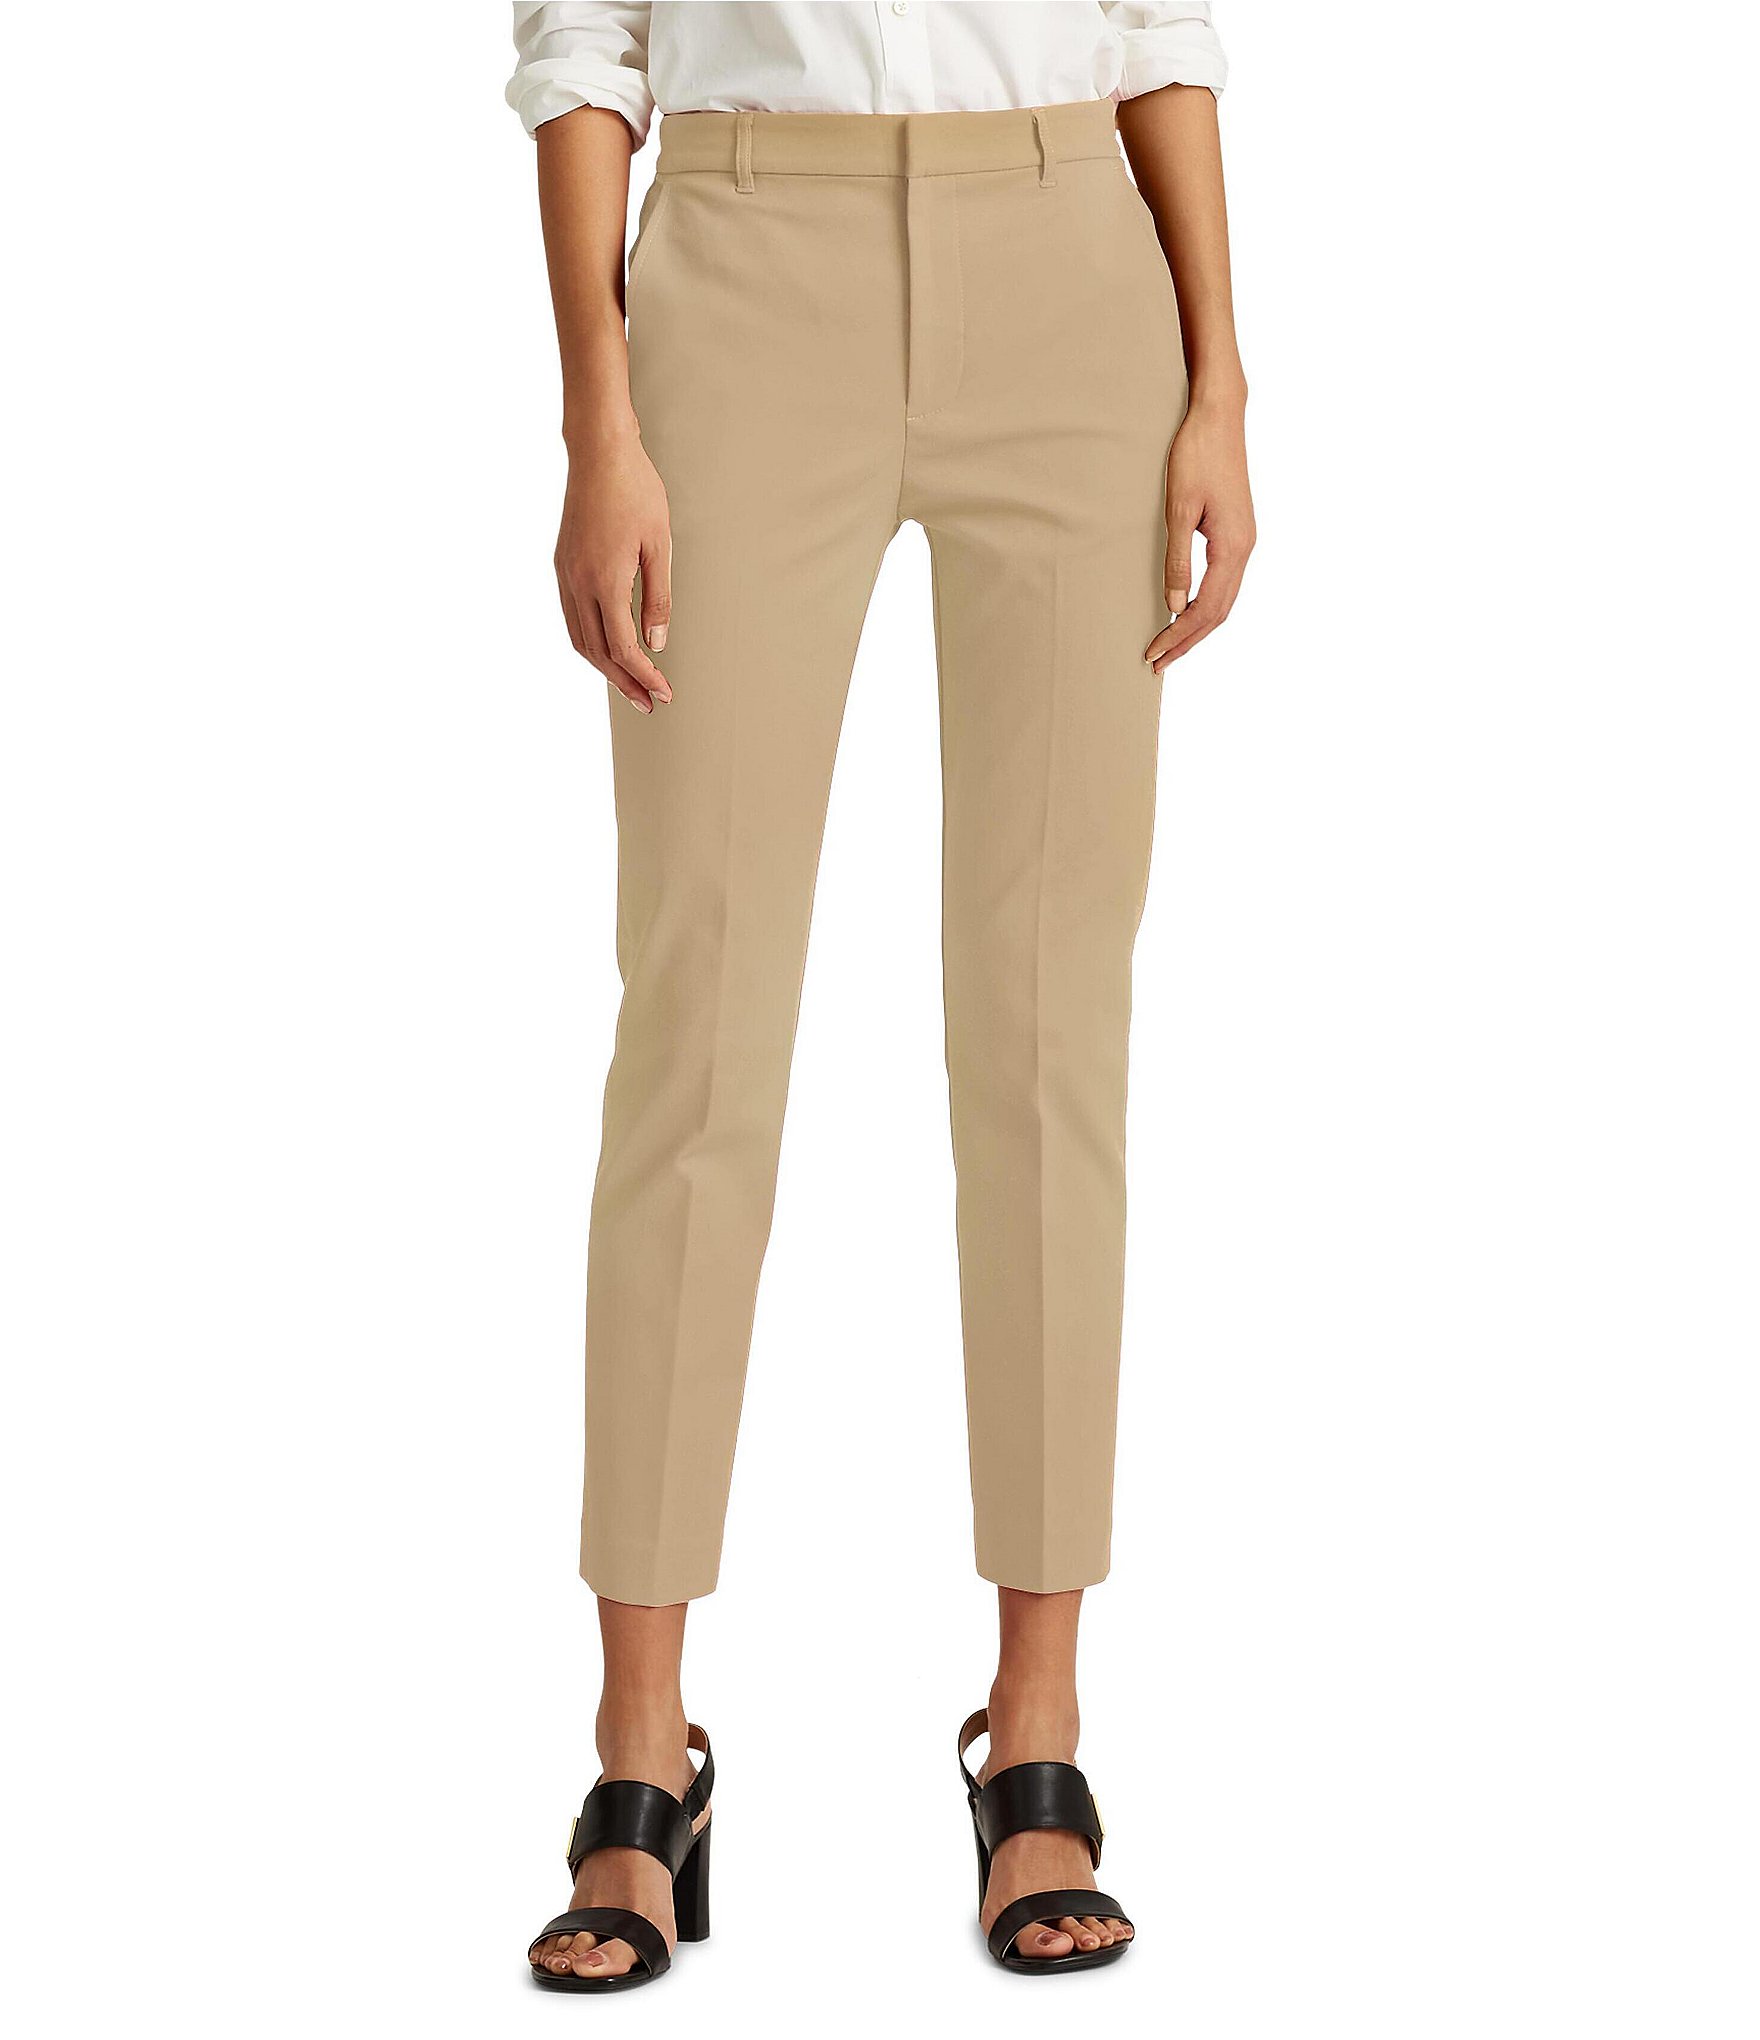 Women Cropped Trousers - Buy Women Cropped Trousers online in India